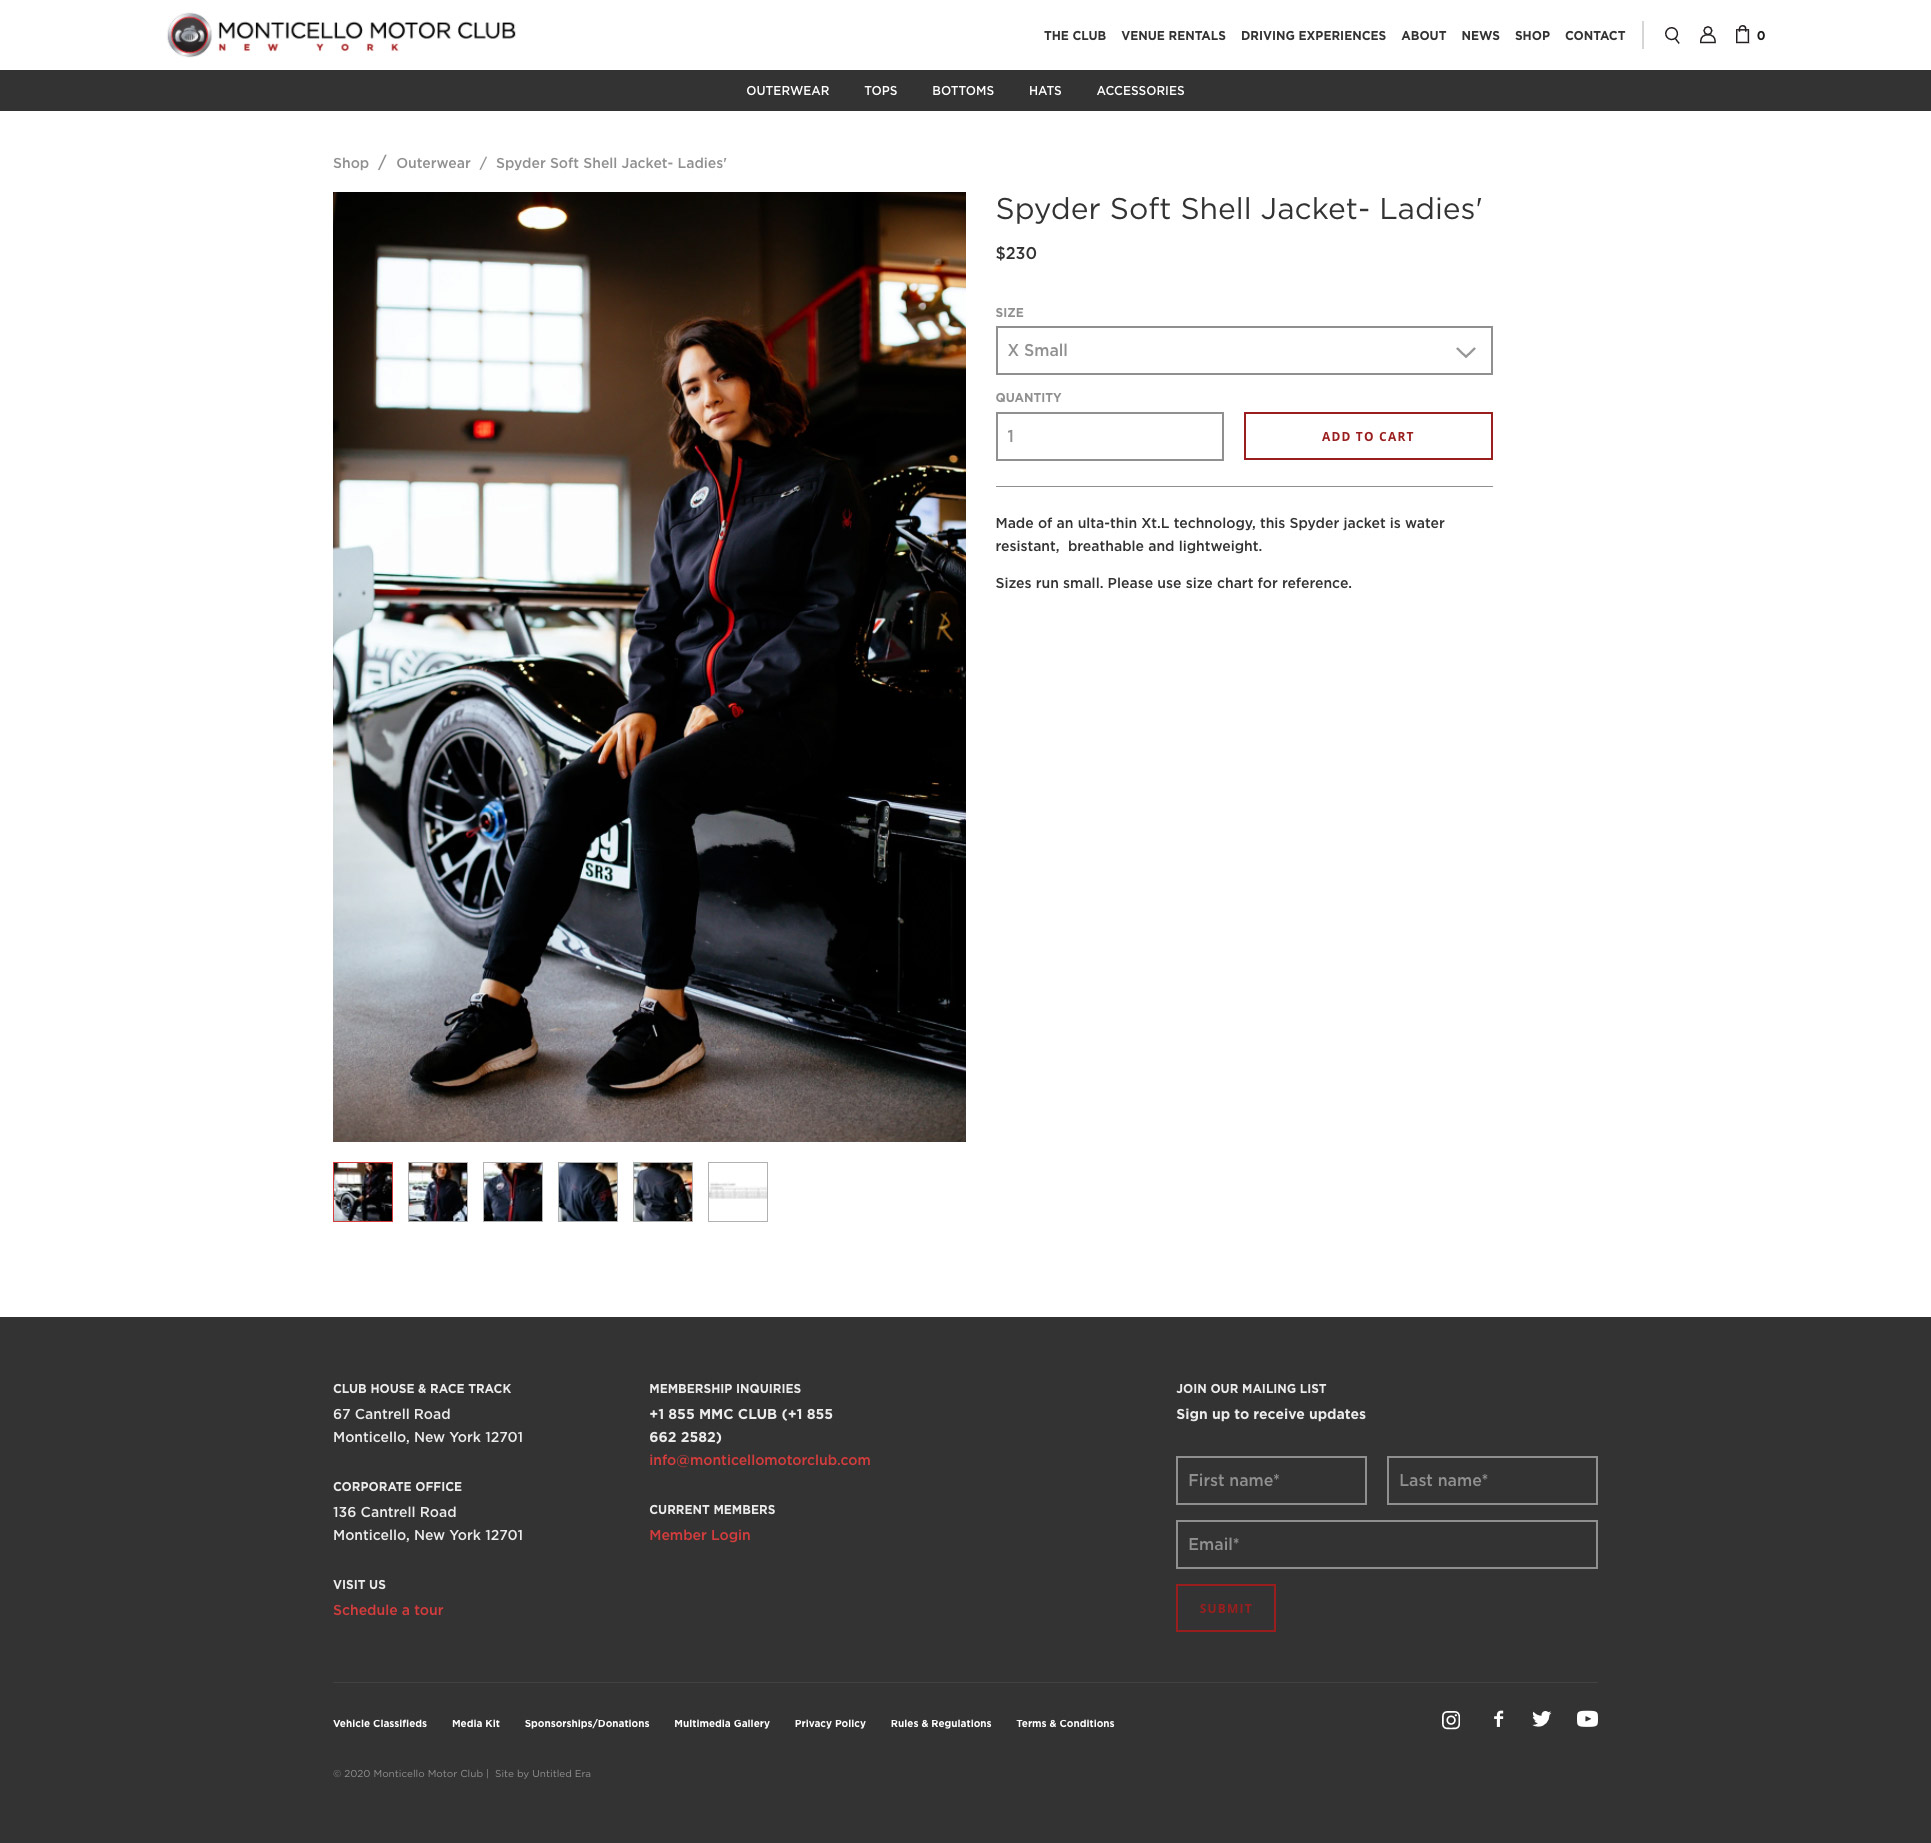 A screenshot of the MMC website Shop product page for desktop